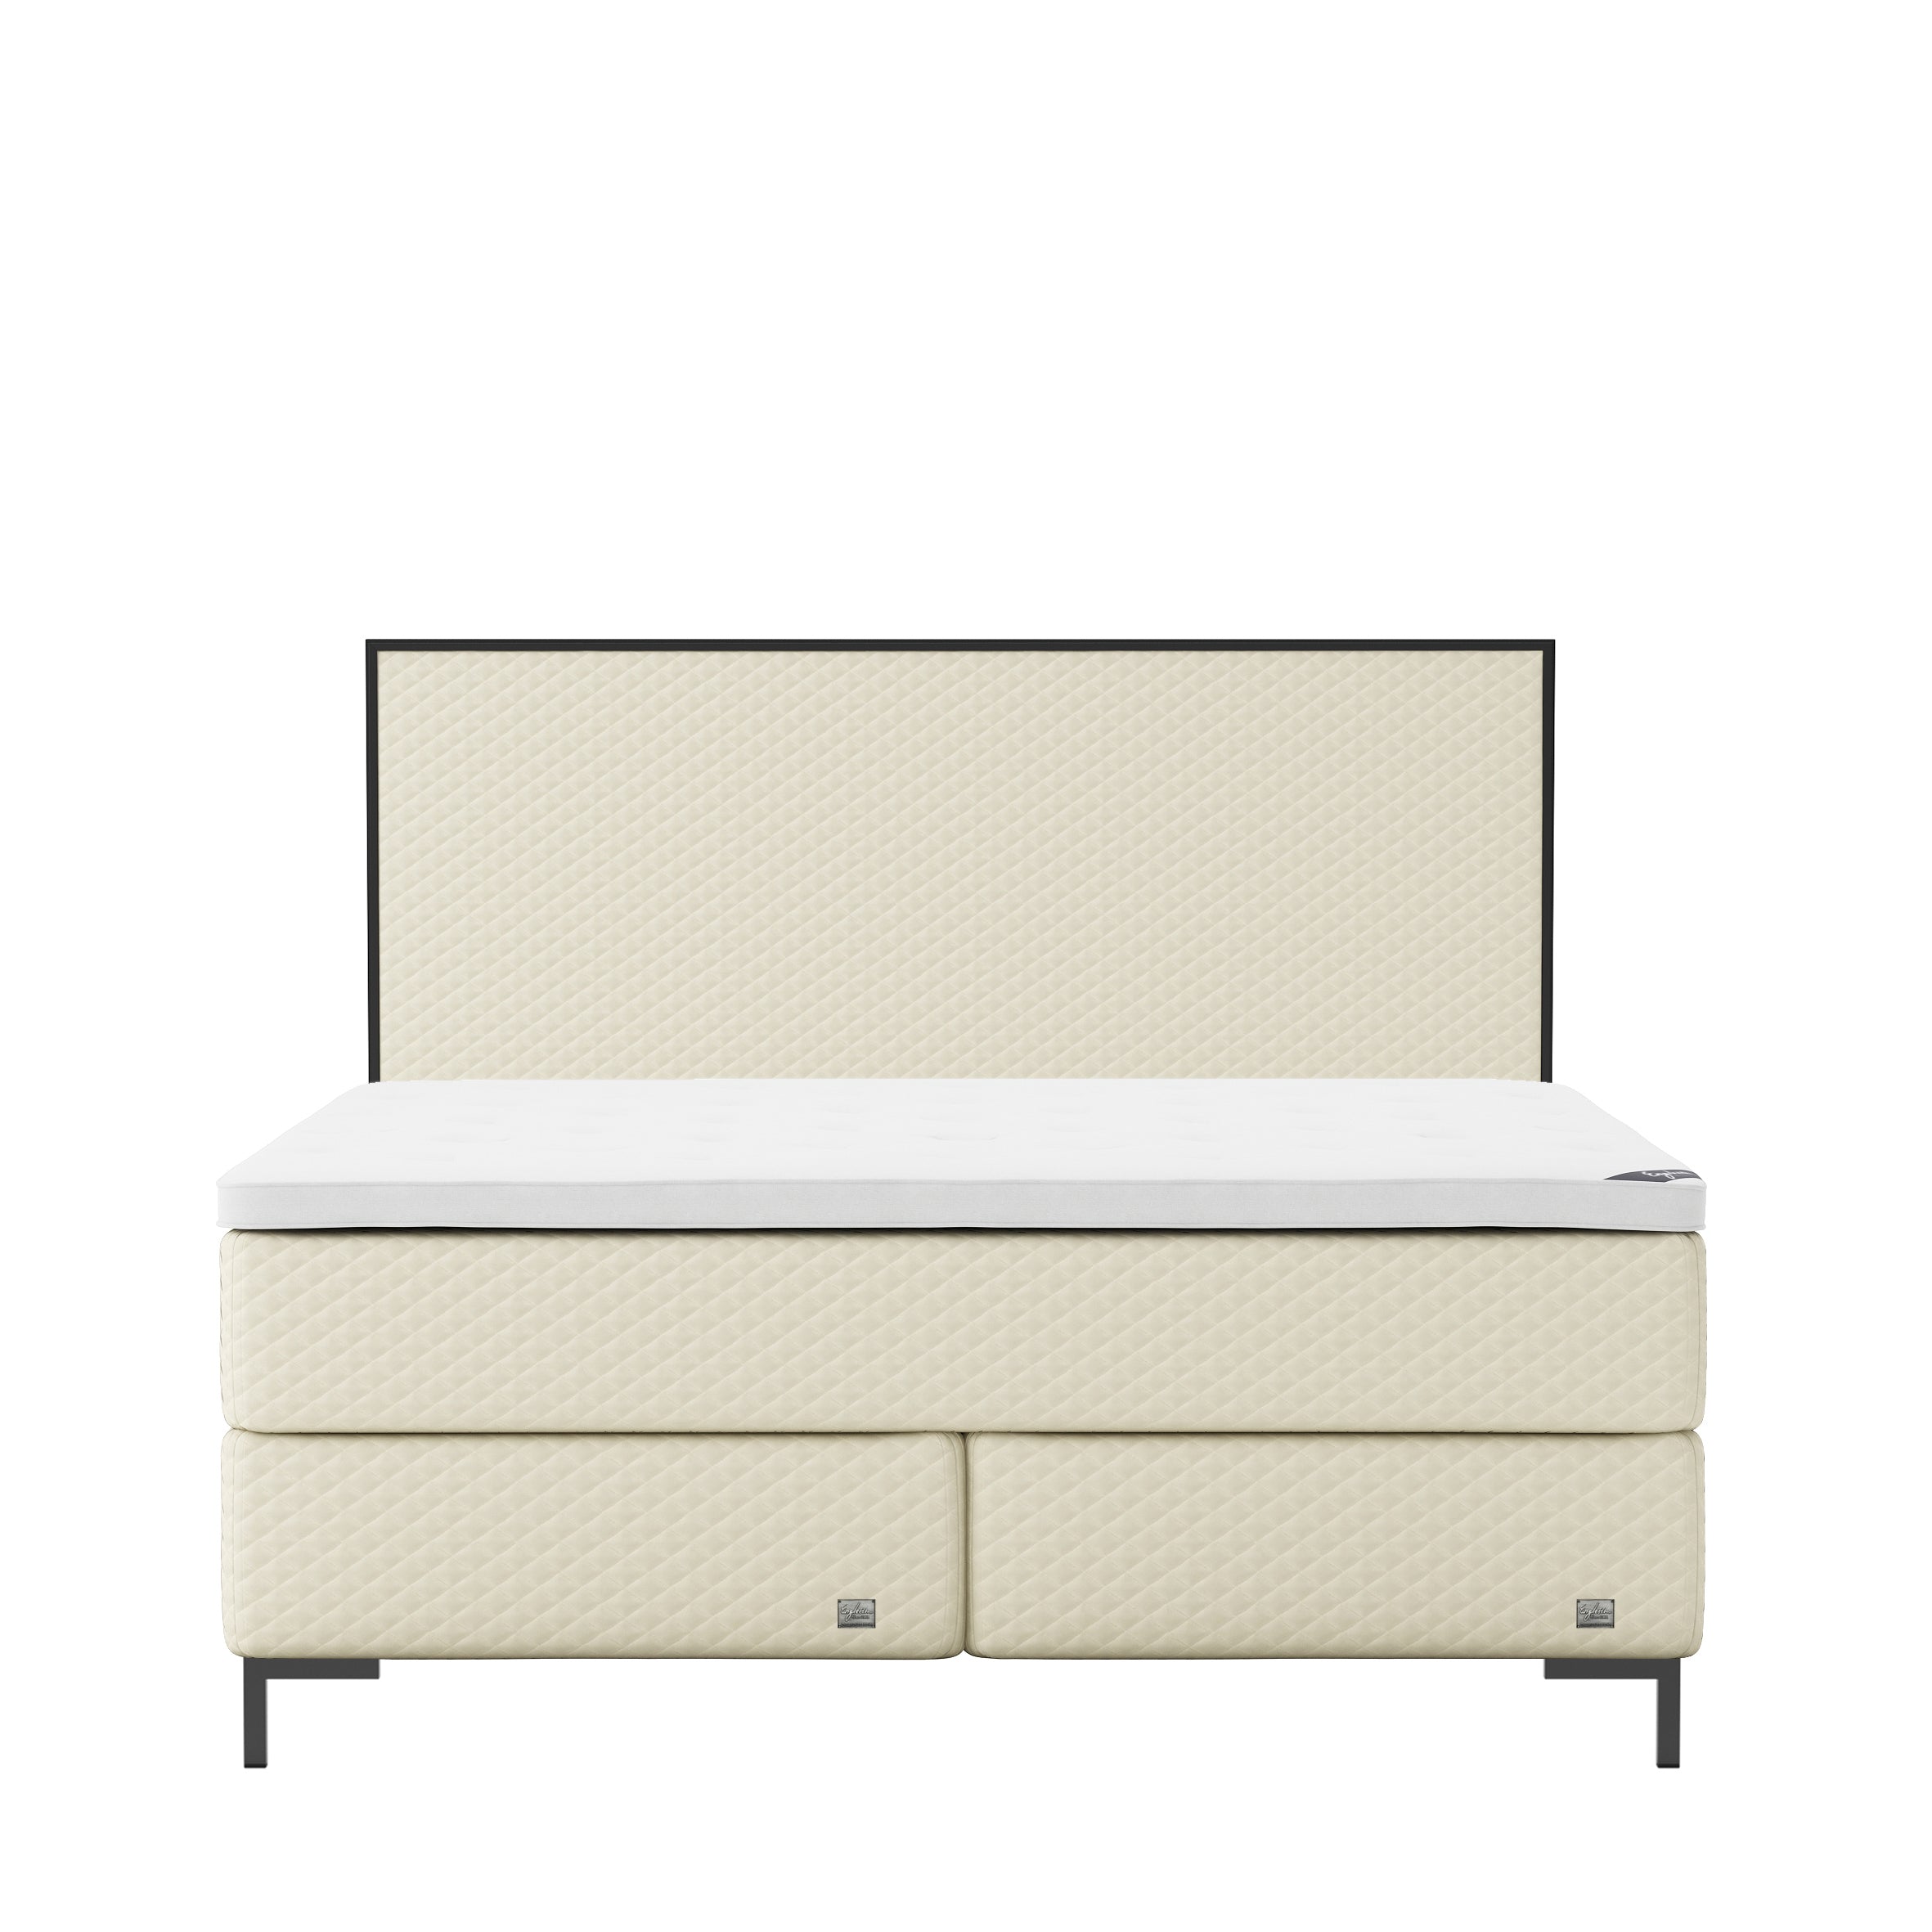 Englesson Beds Pearl / 160 x 200 Superior Kontinental High Frame SC160MF20 #Variant_Pearl 